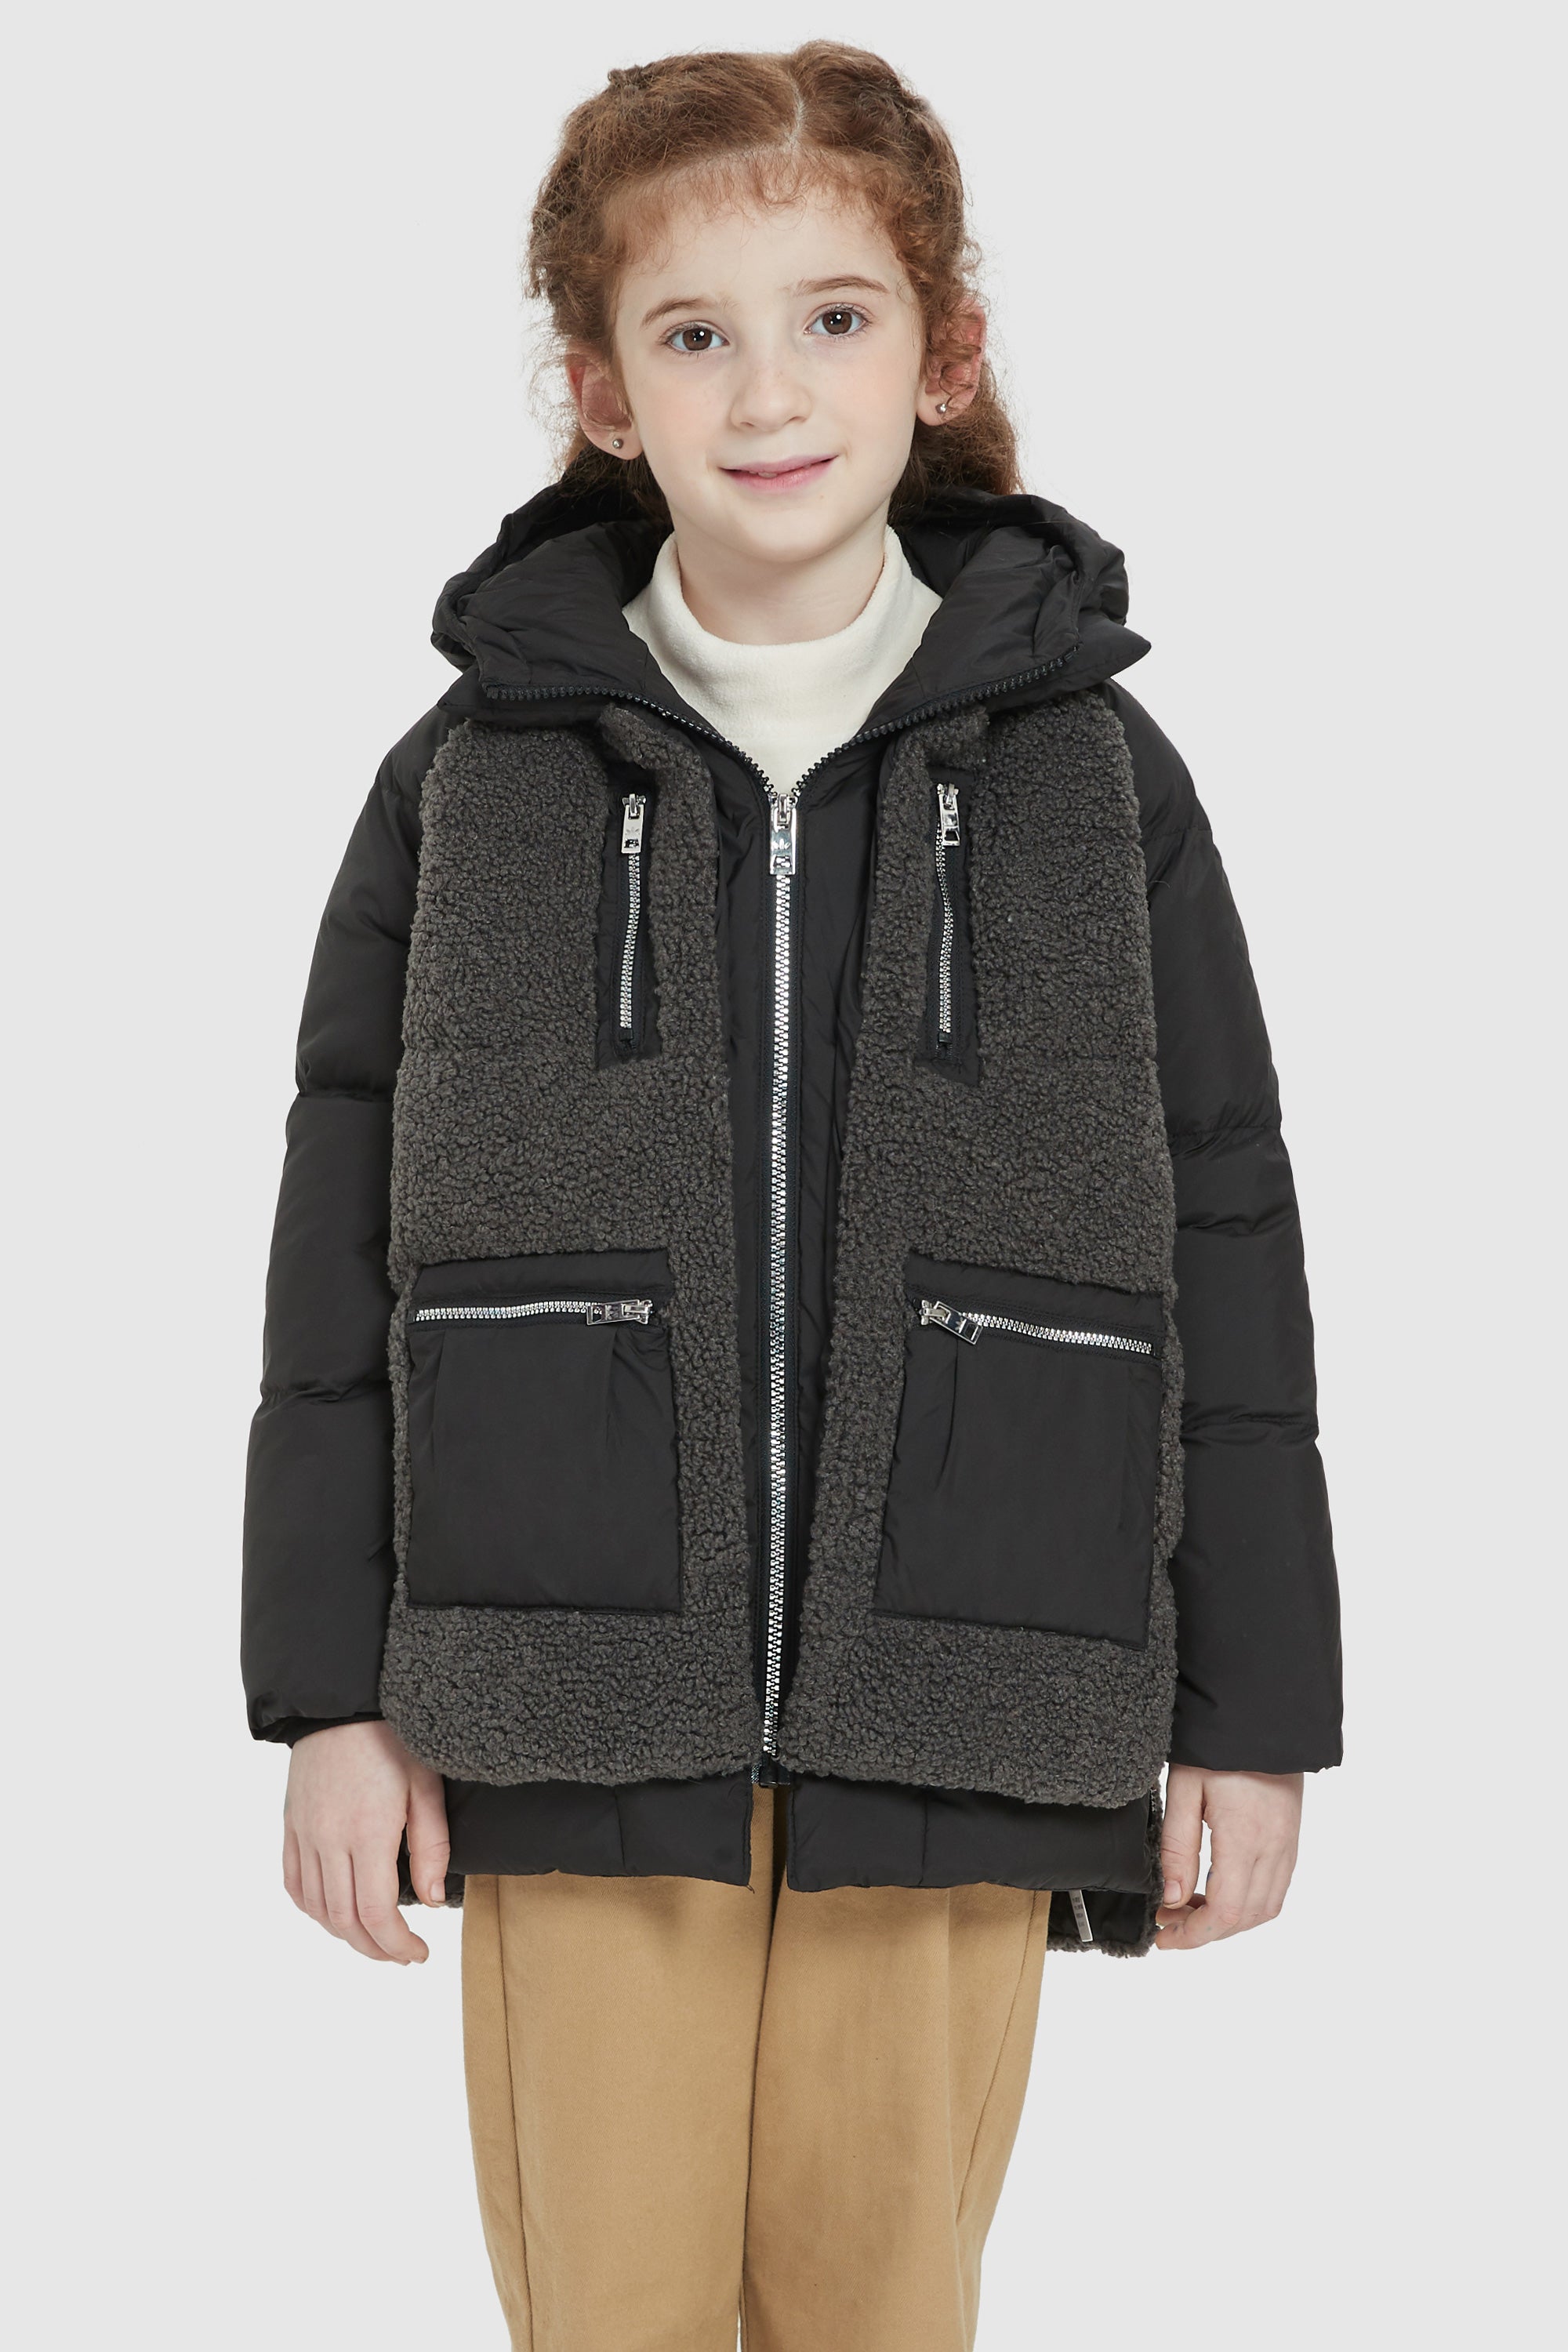 Children's Puffer Down Jacket with Multi Pockets